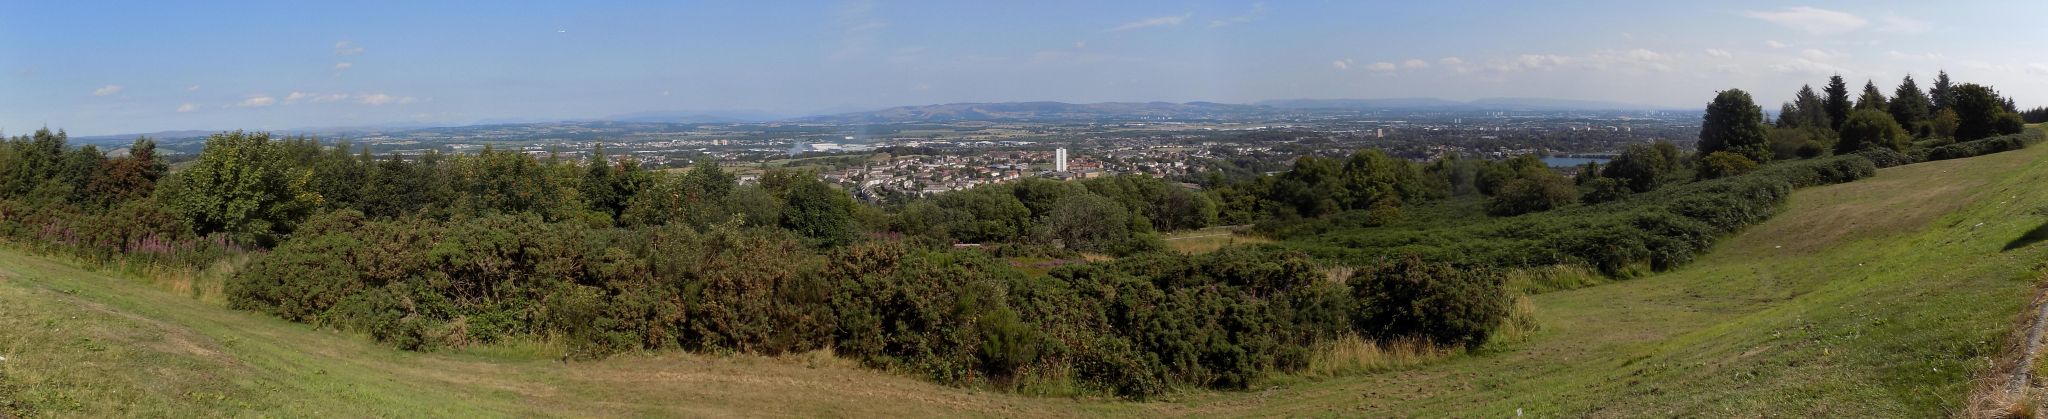 View from the "Car Park in the Sky" in Robertson Park area of Gleniffer Braes Country Park